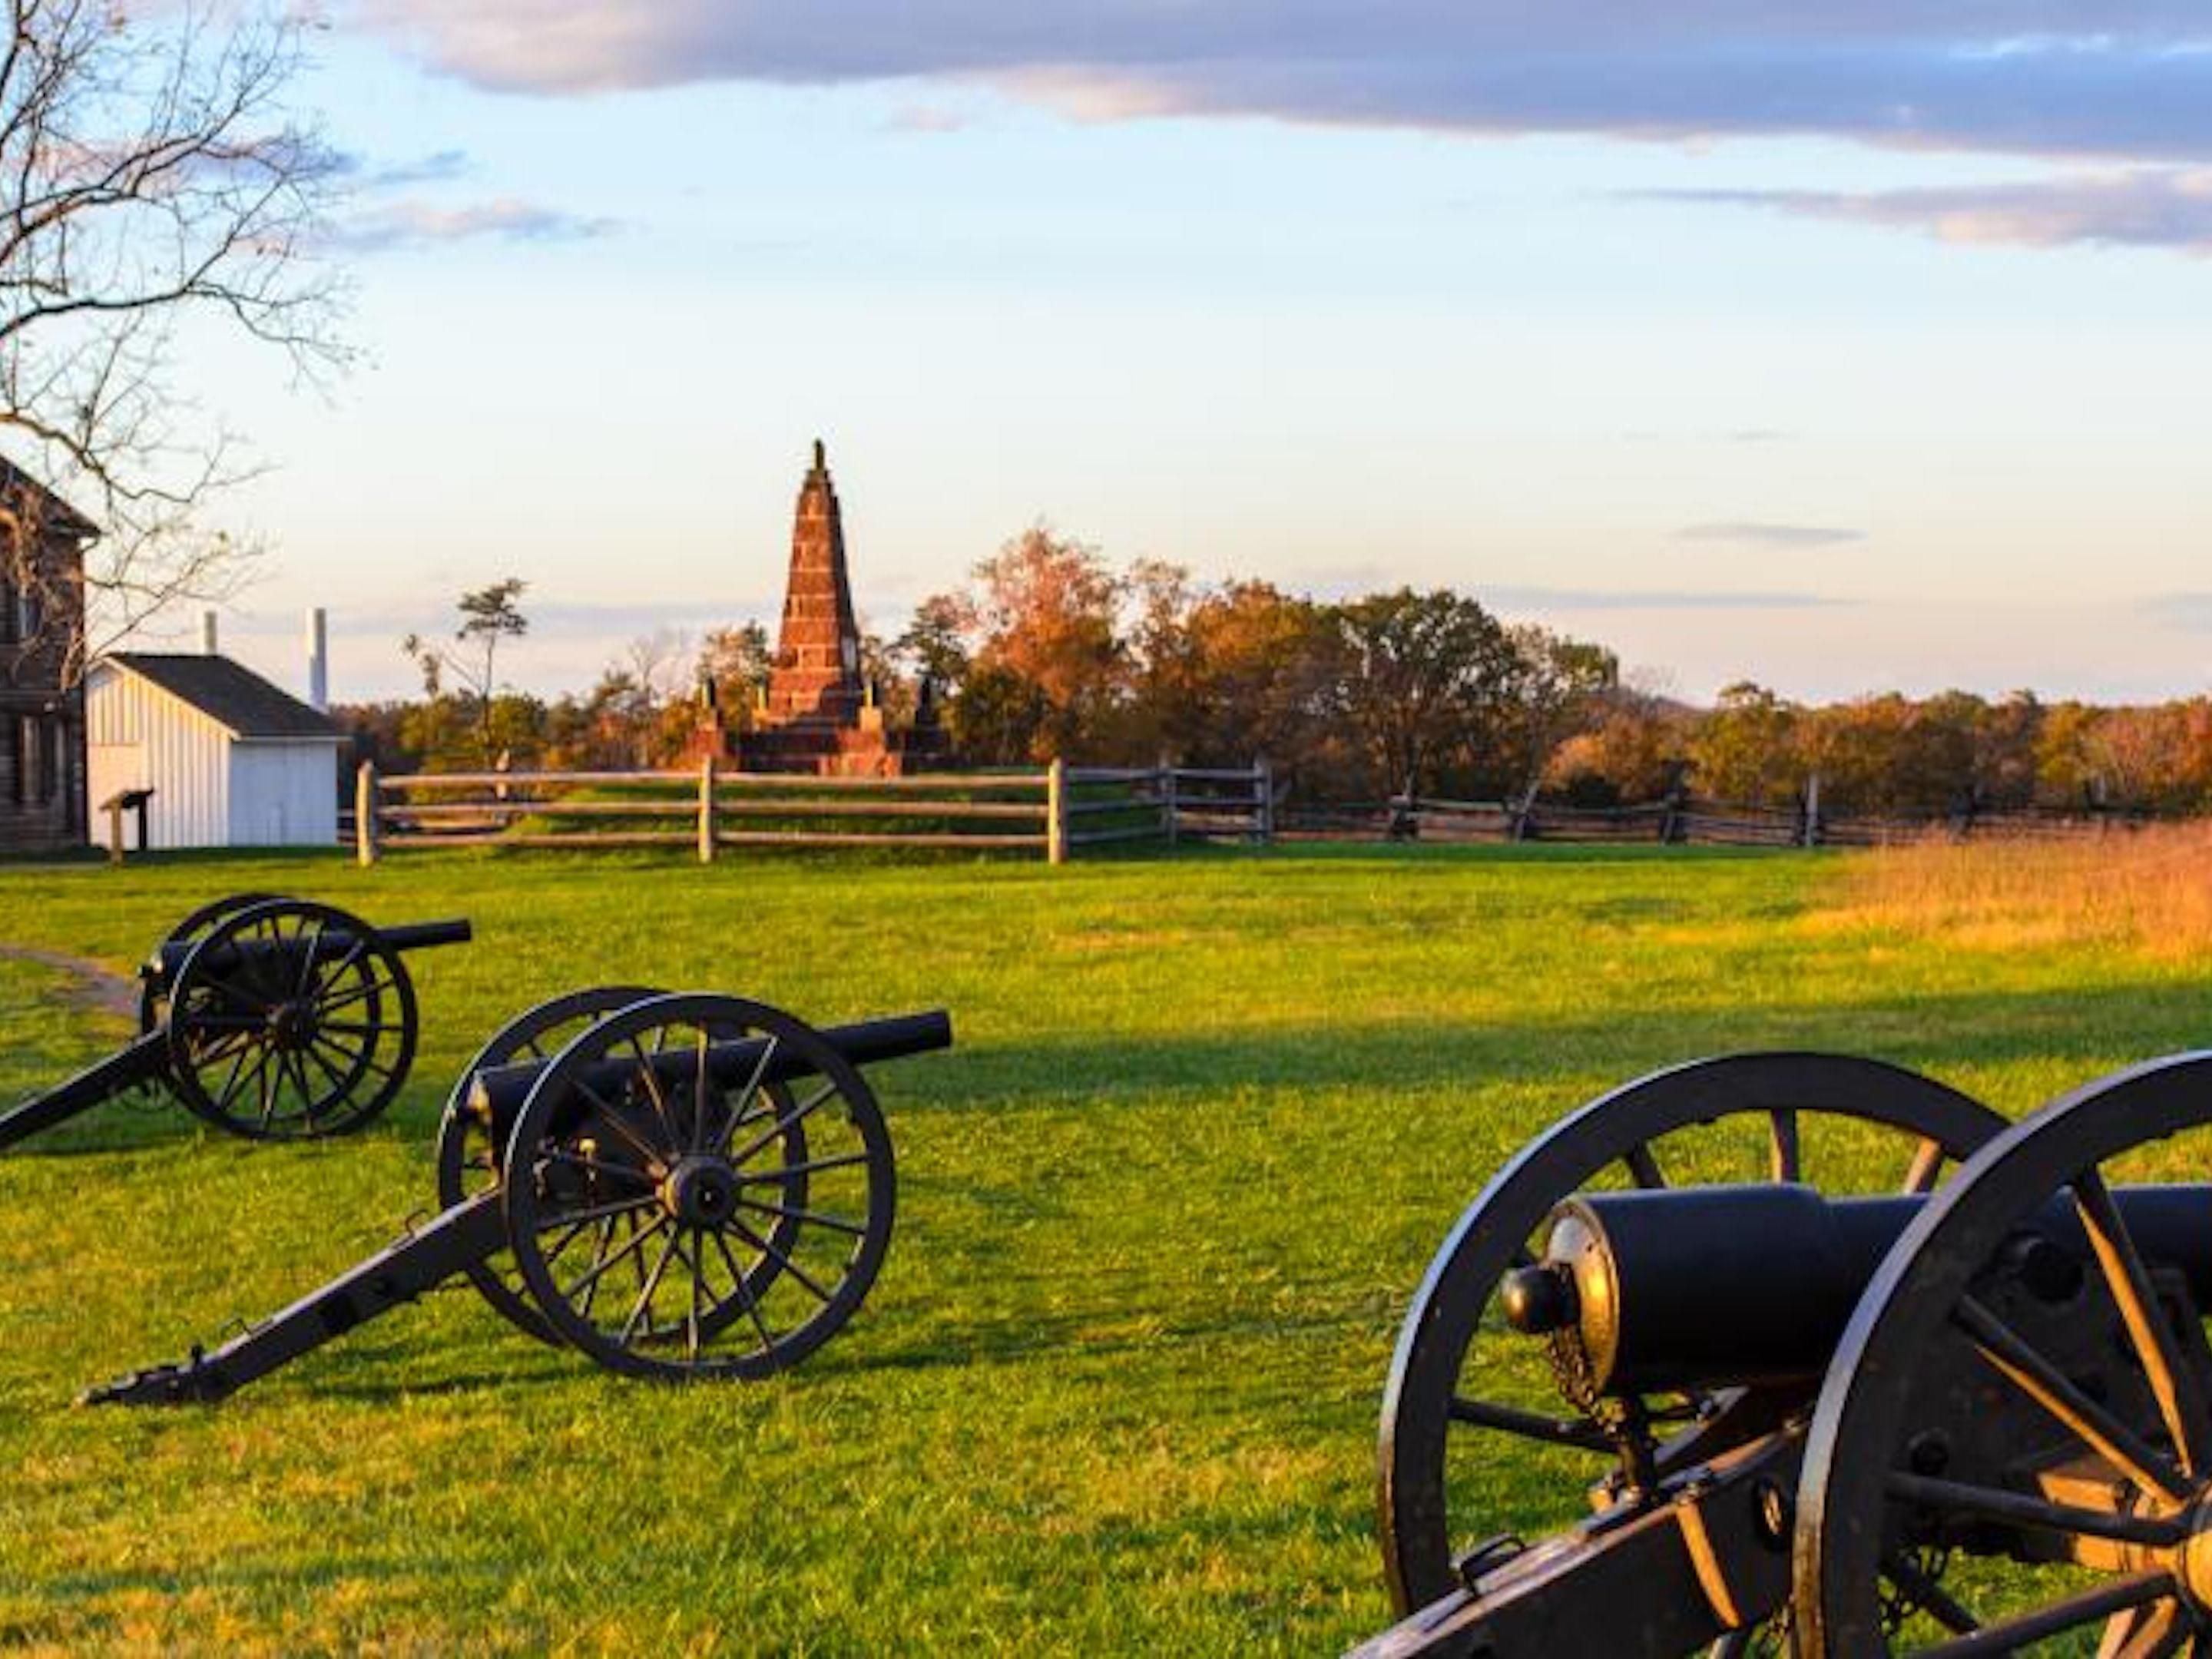 Visit the site of two major American Civil War battles: the First Battle of Bull Run, also called the First Battle of Manassas, and the Second Battle of Bull Run or Second Battle of Manassas. Located within walking distance from hotel.